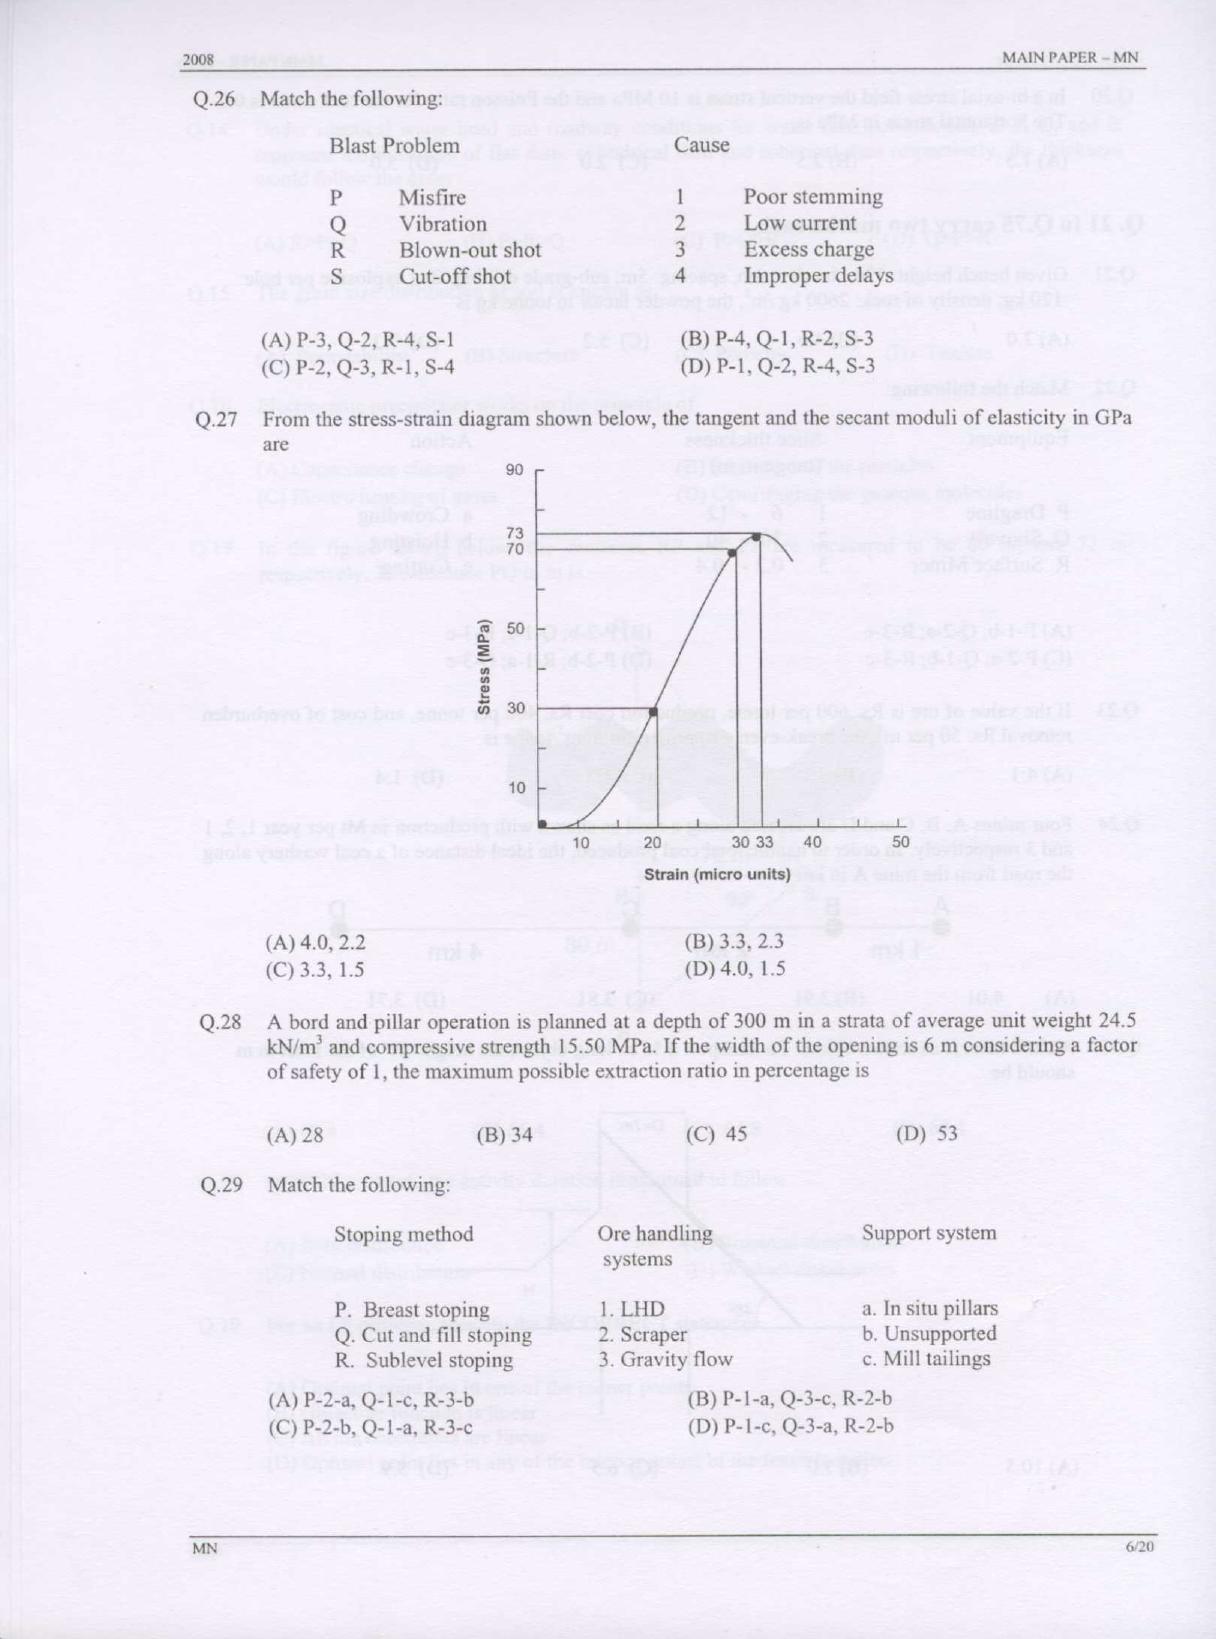 GATE 2008 Mining Engineering (MN) Question Paper with Answer Key - Page 6